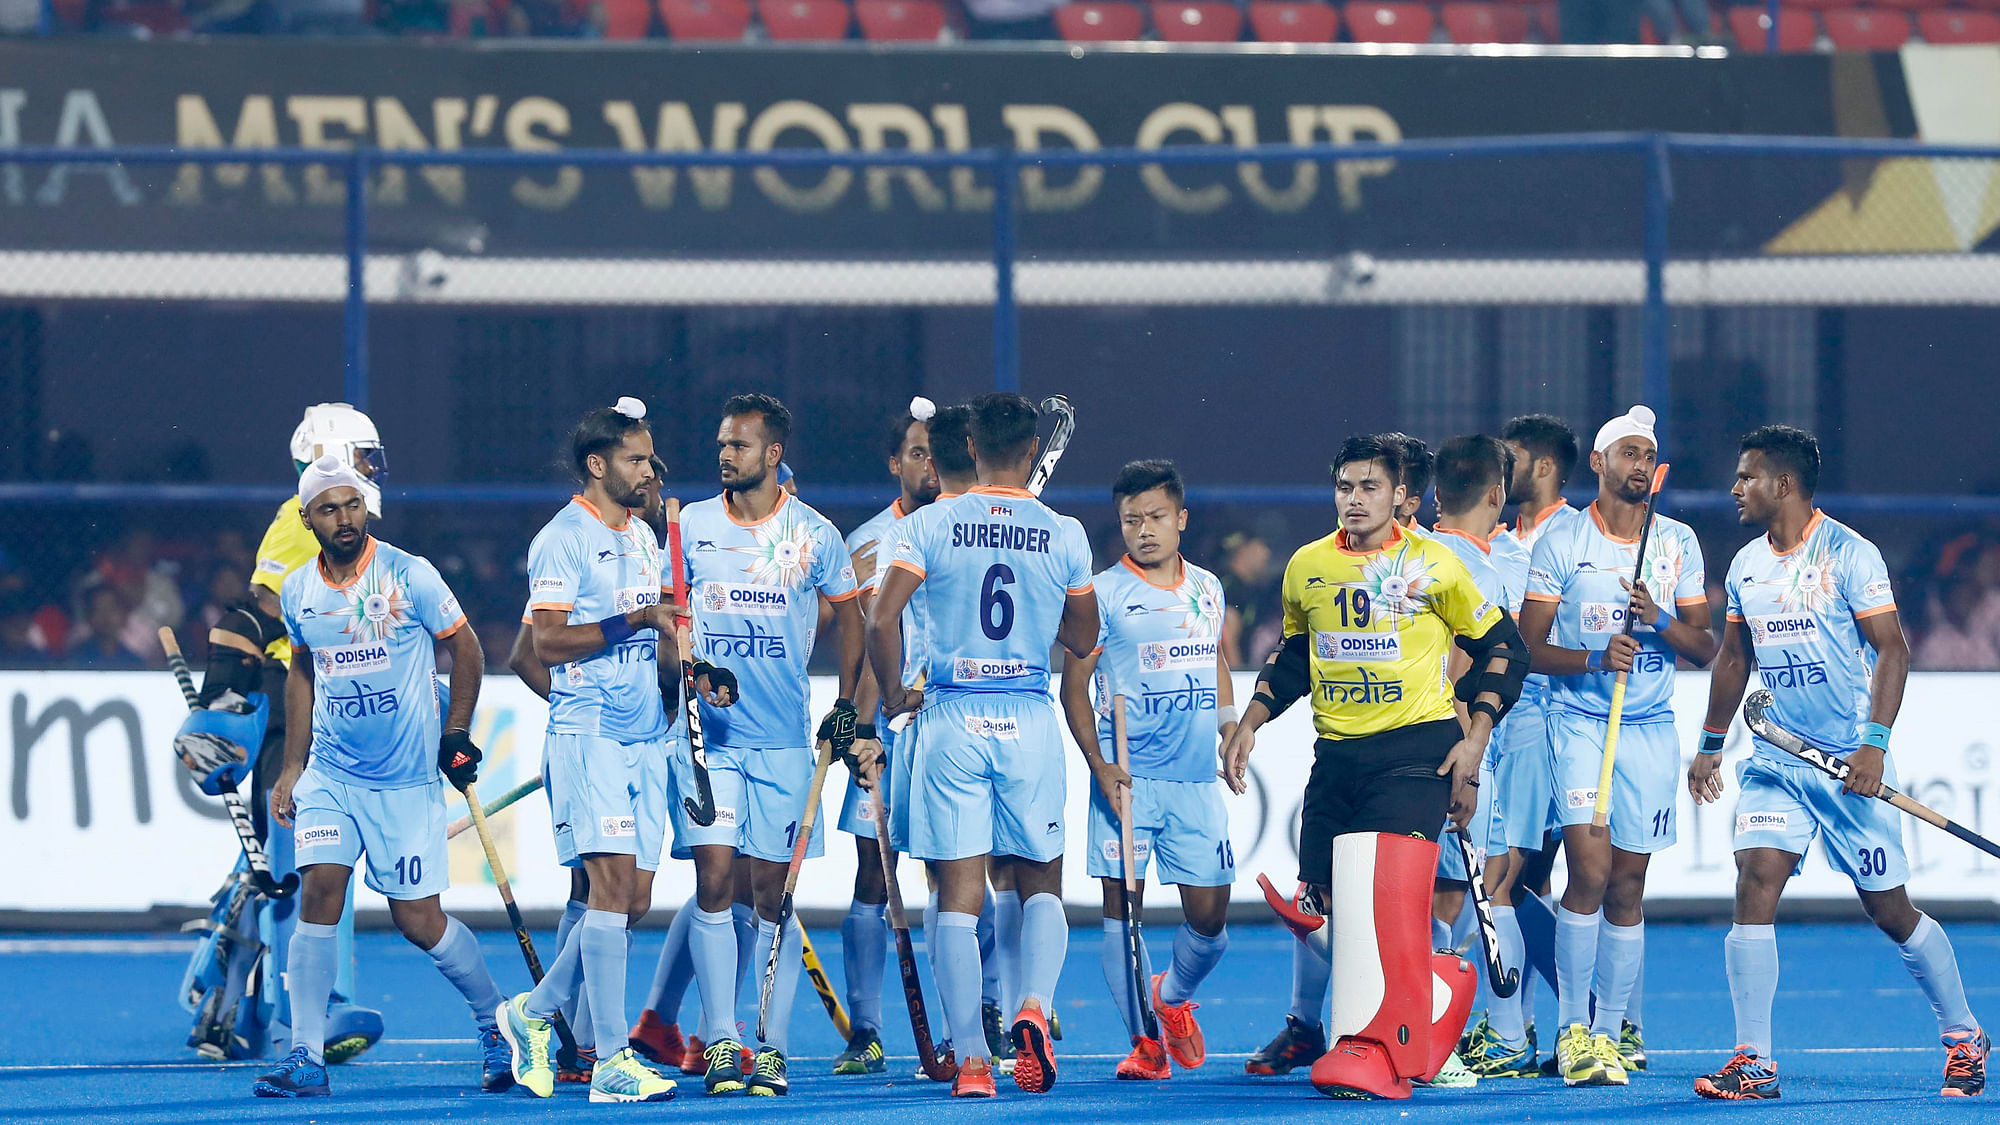 World No. 5 India beat South Africa 5-0 in the Pool C opener of the 2018 FIH Men’s Hockey World Cup at the Kalinga Stadium in Bhubaneswar.